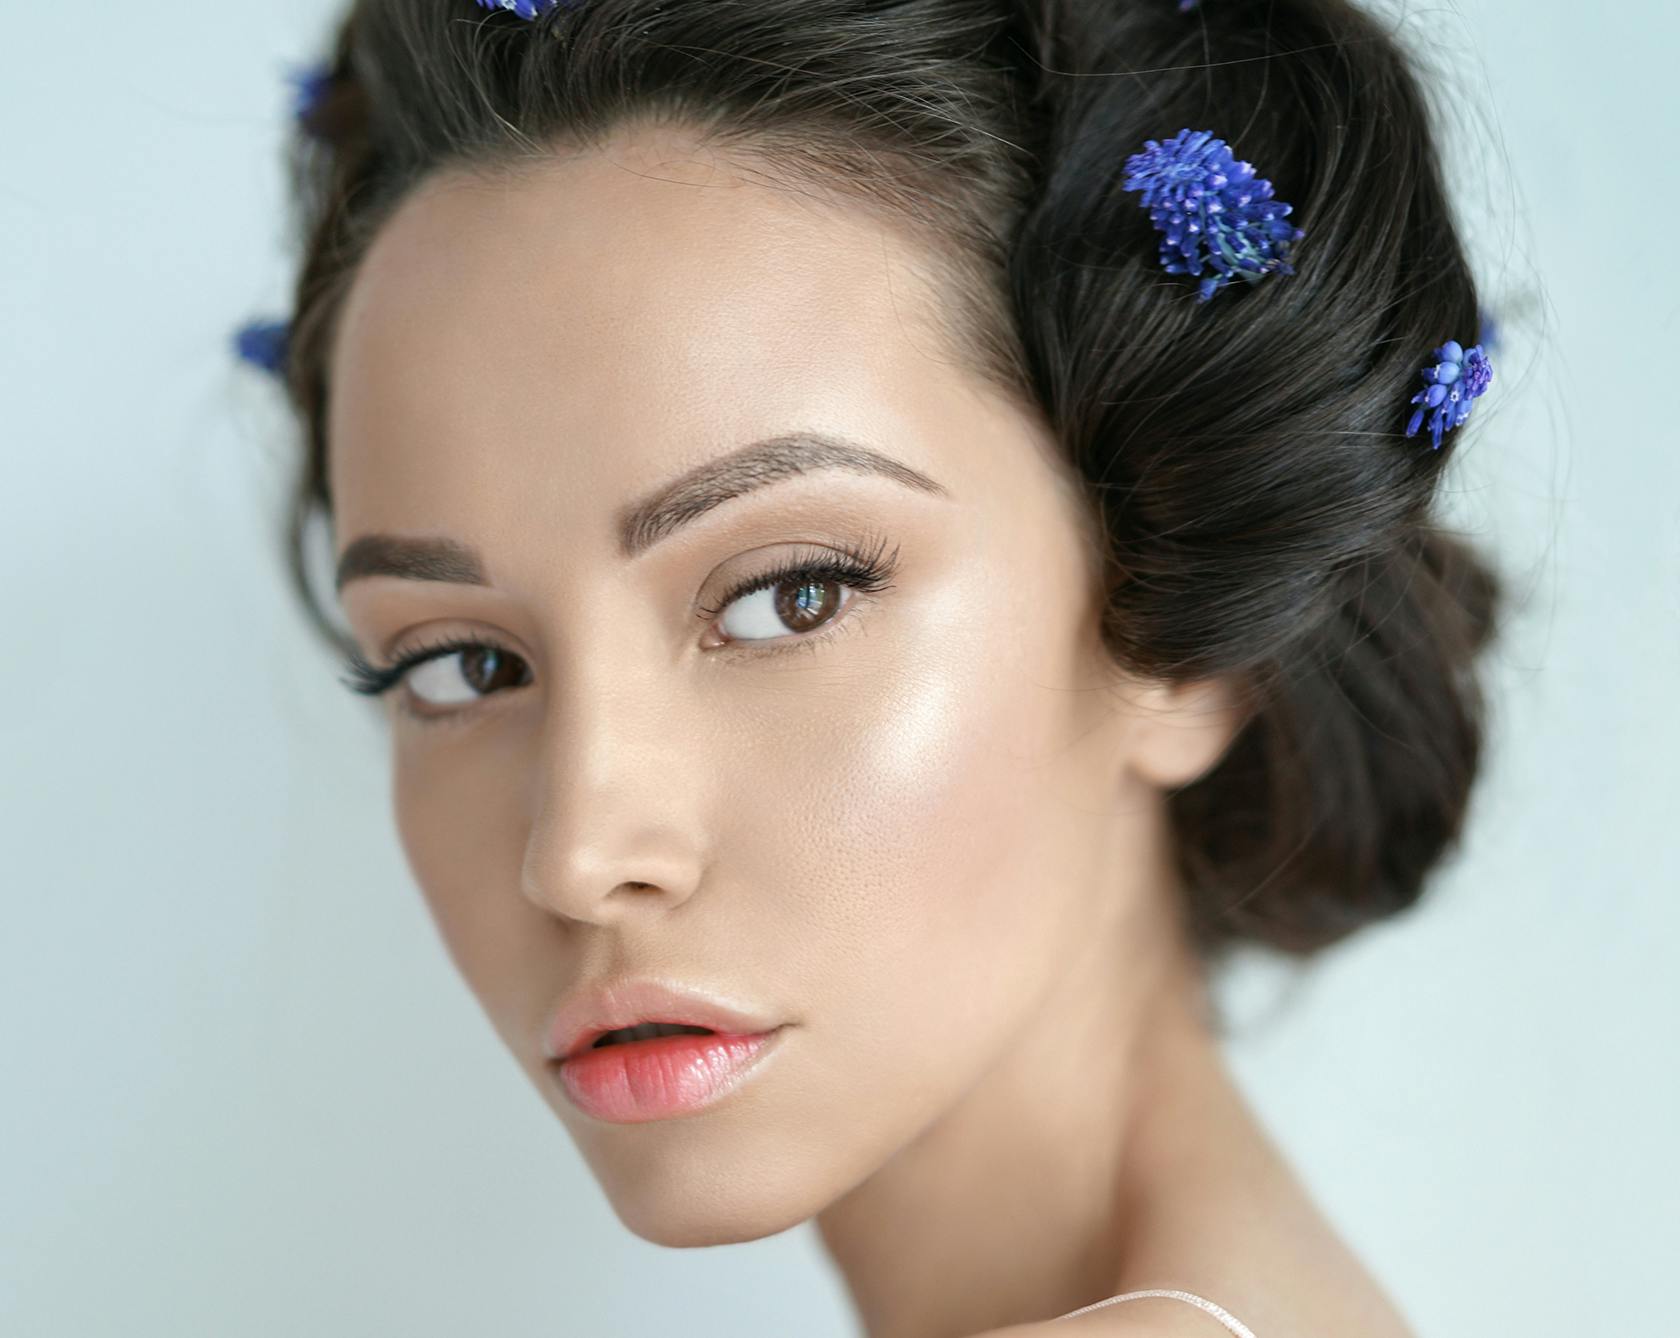 a close up of a woman's face with black hair with blue floral clips